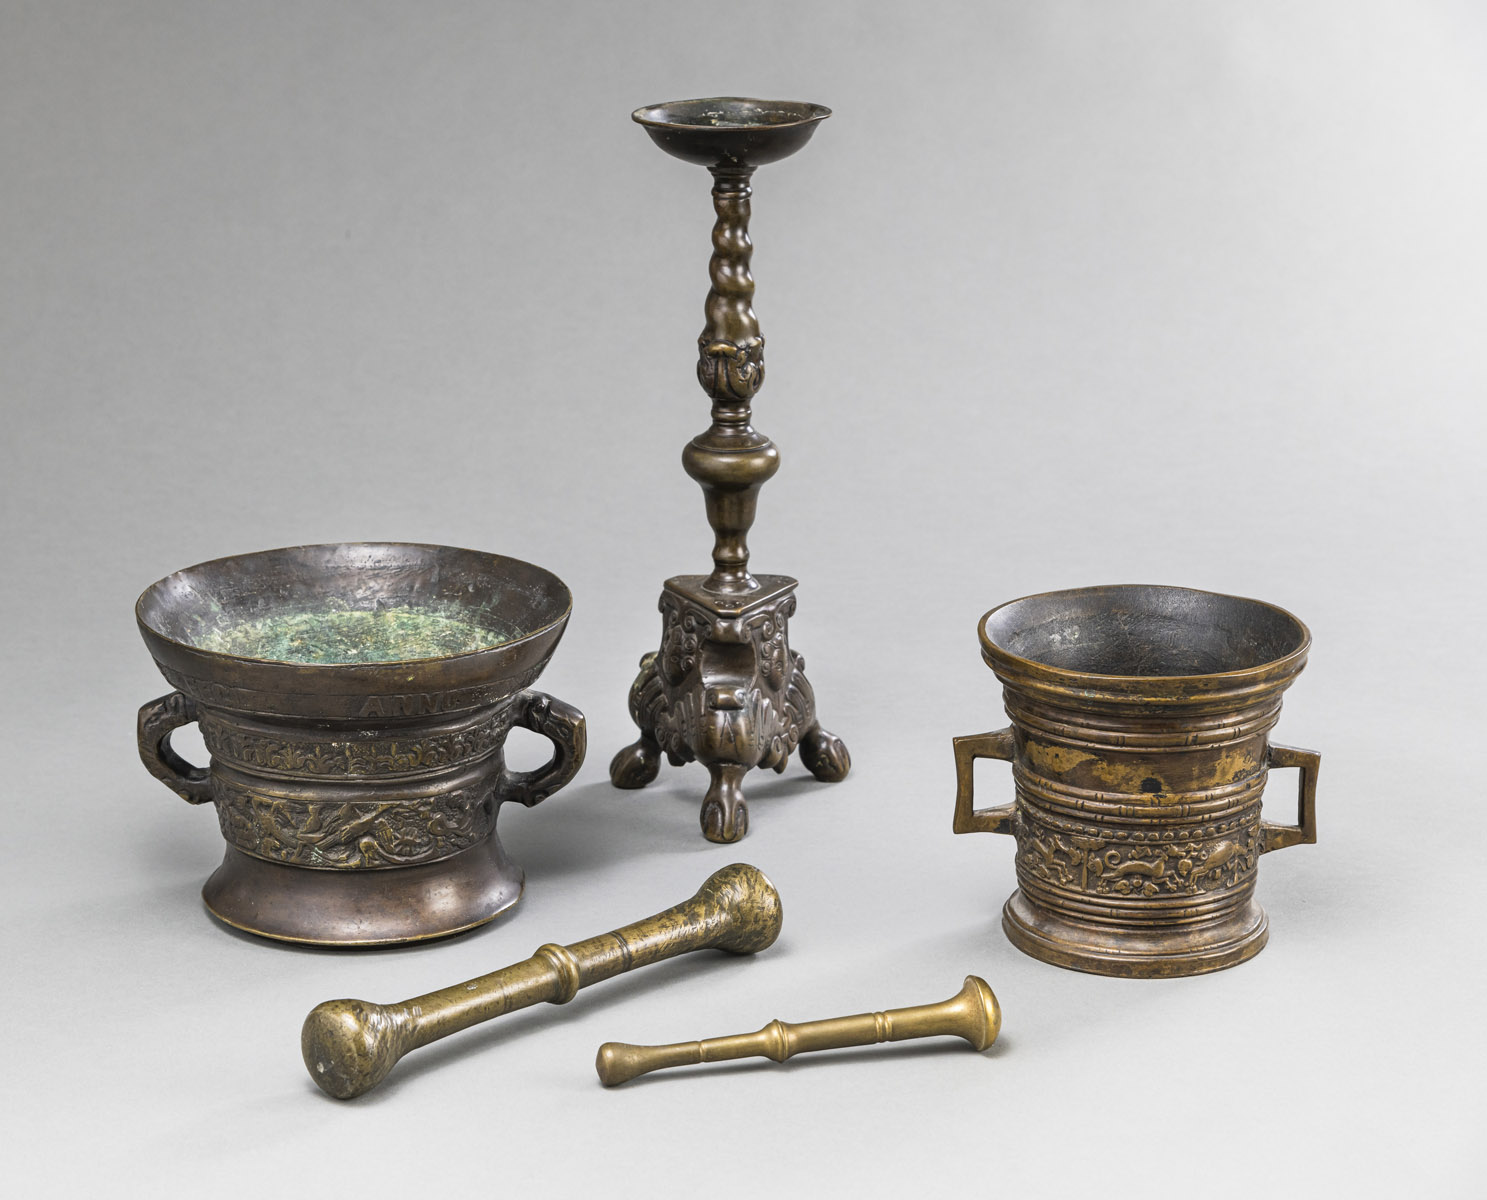 TWO BRONZE MORTARS WITH PESTLES AND A CANDLESTICK - Image 2 of 4